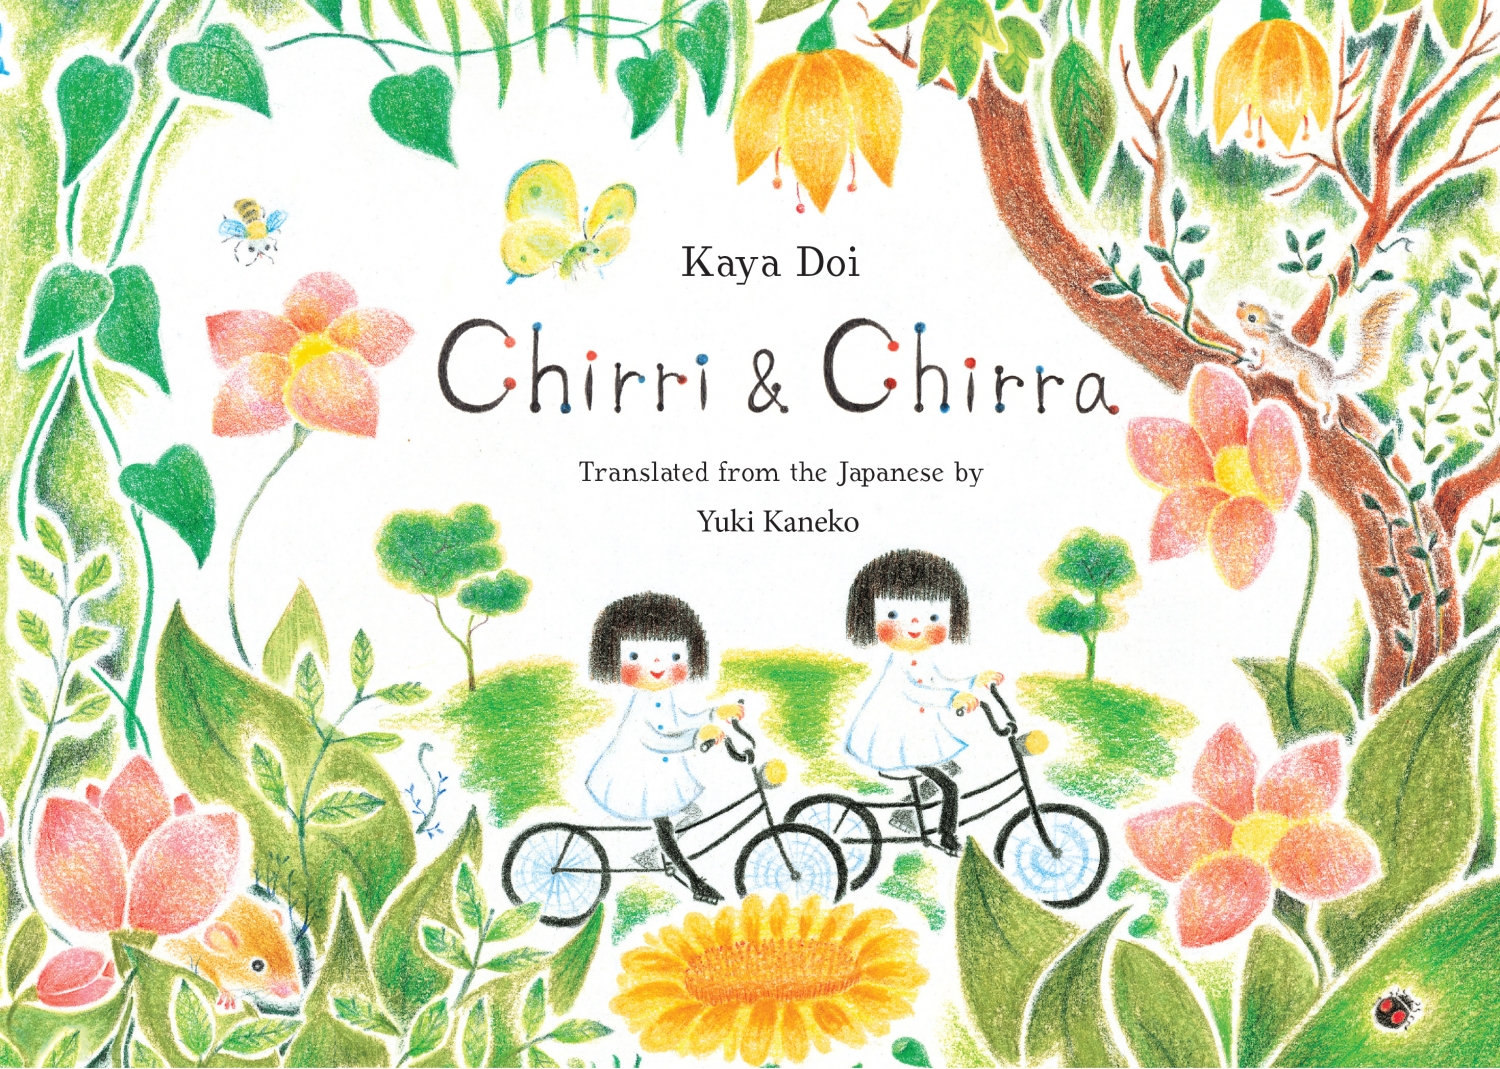 Cover of Chirri & Chirra featuring an illustration of two children biking through foliage and flowers.